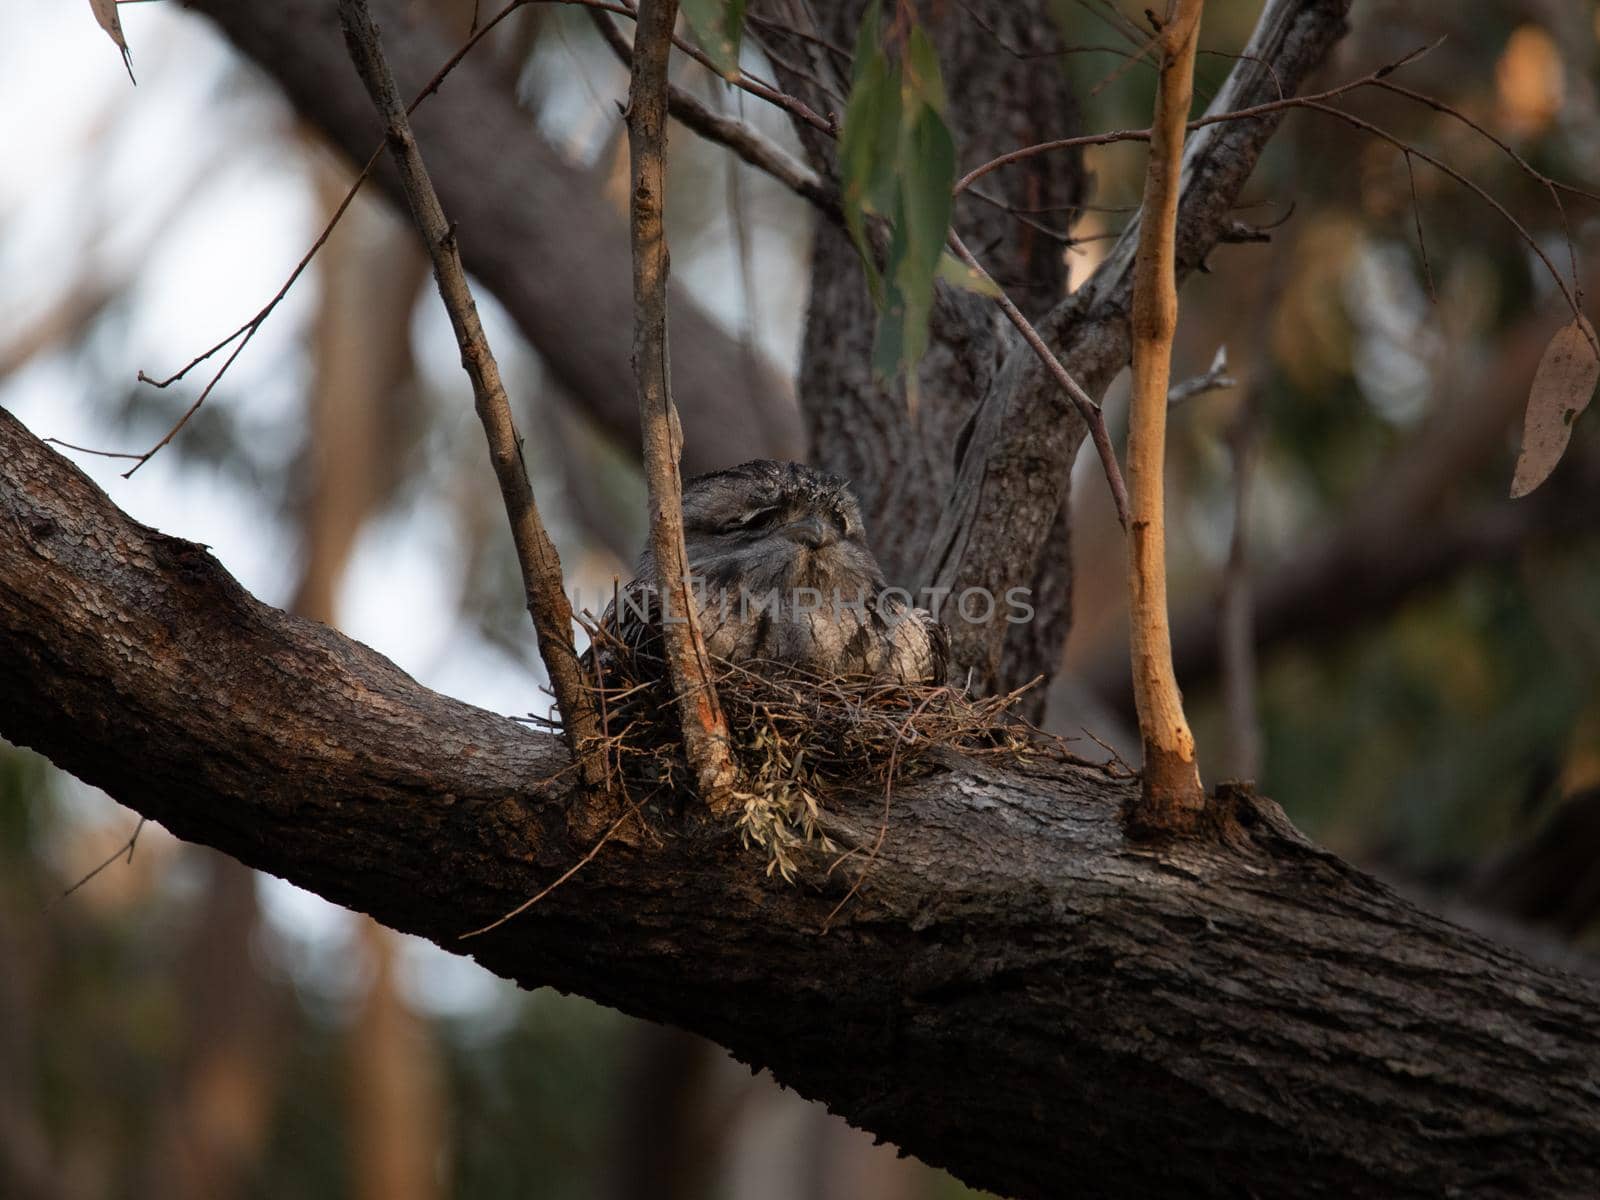 Tawny Frogmouth nesting on top of its chicks. by braydenstanfordphoto